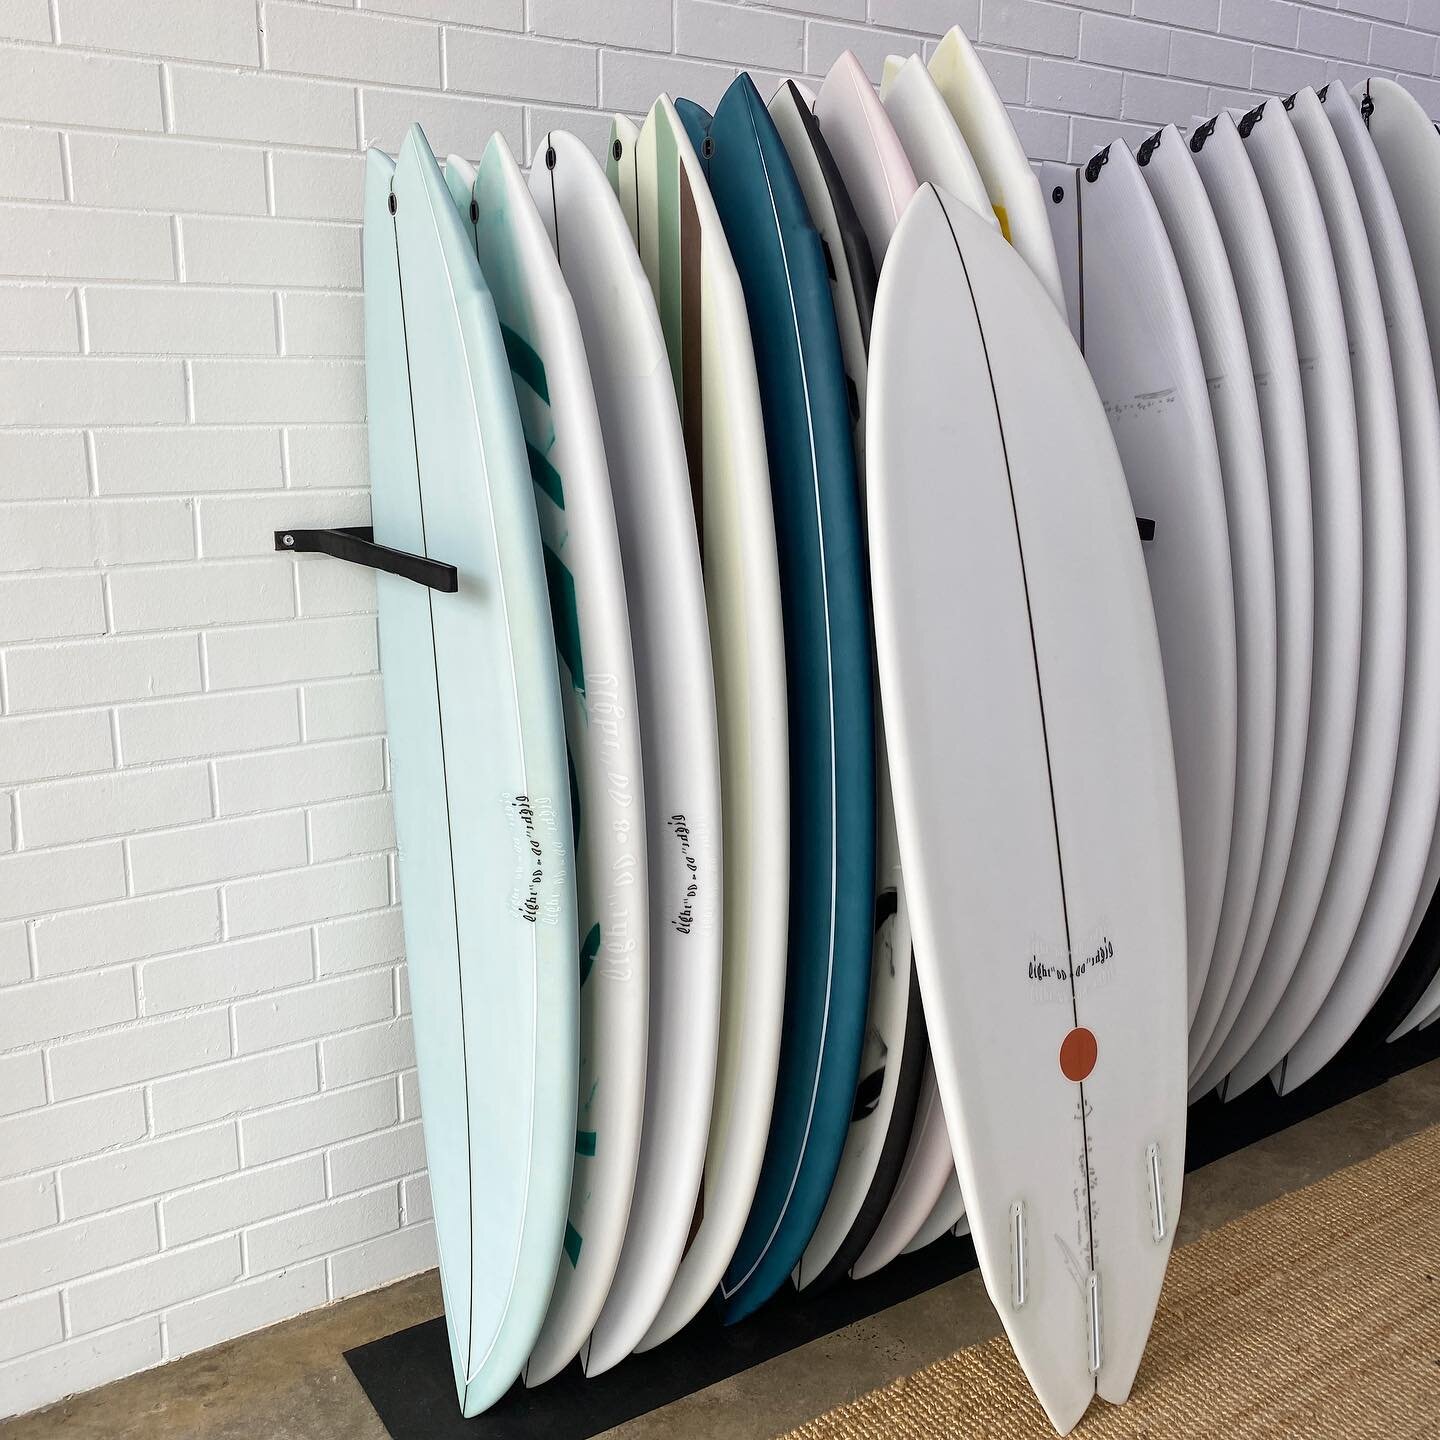 @80surfboards 
FUN MACHINES 🔥 

Looking for a fun a twinny to make your average spring surf a whole lot better, the BLACK MODEL twin is the one 😯 

Come have a feel before they&rsquo;re all gone 💨 

DM for any info